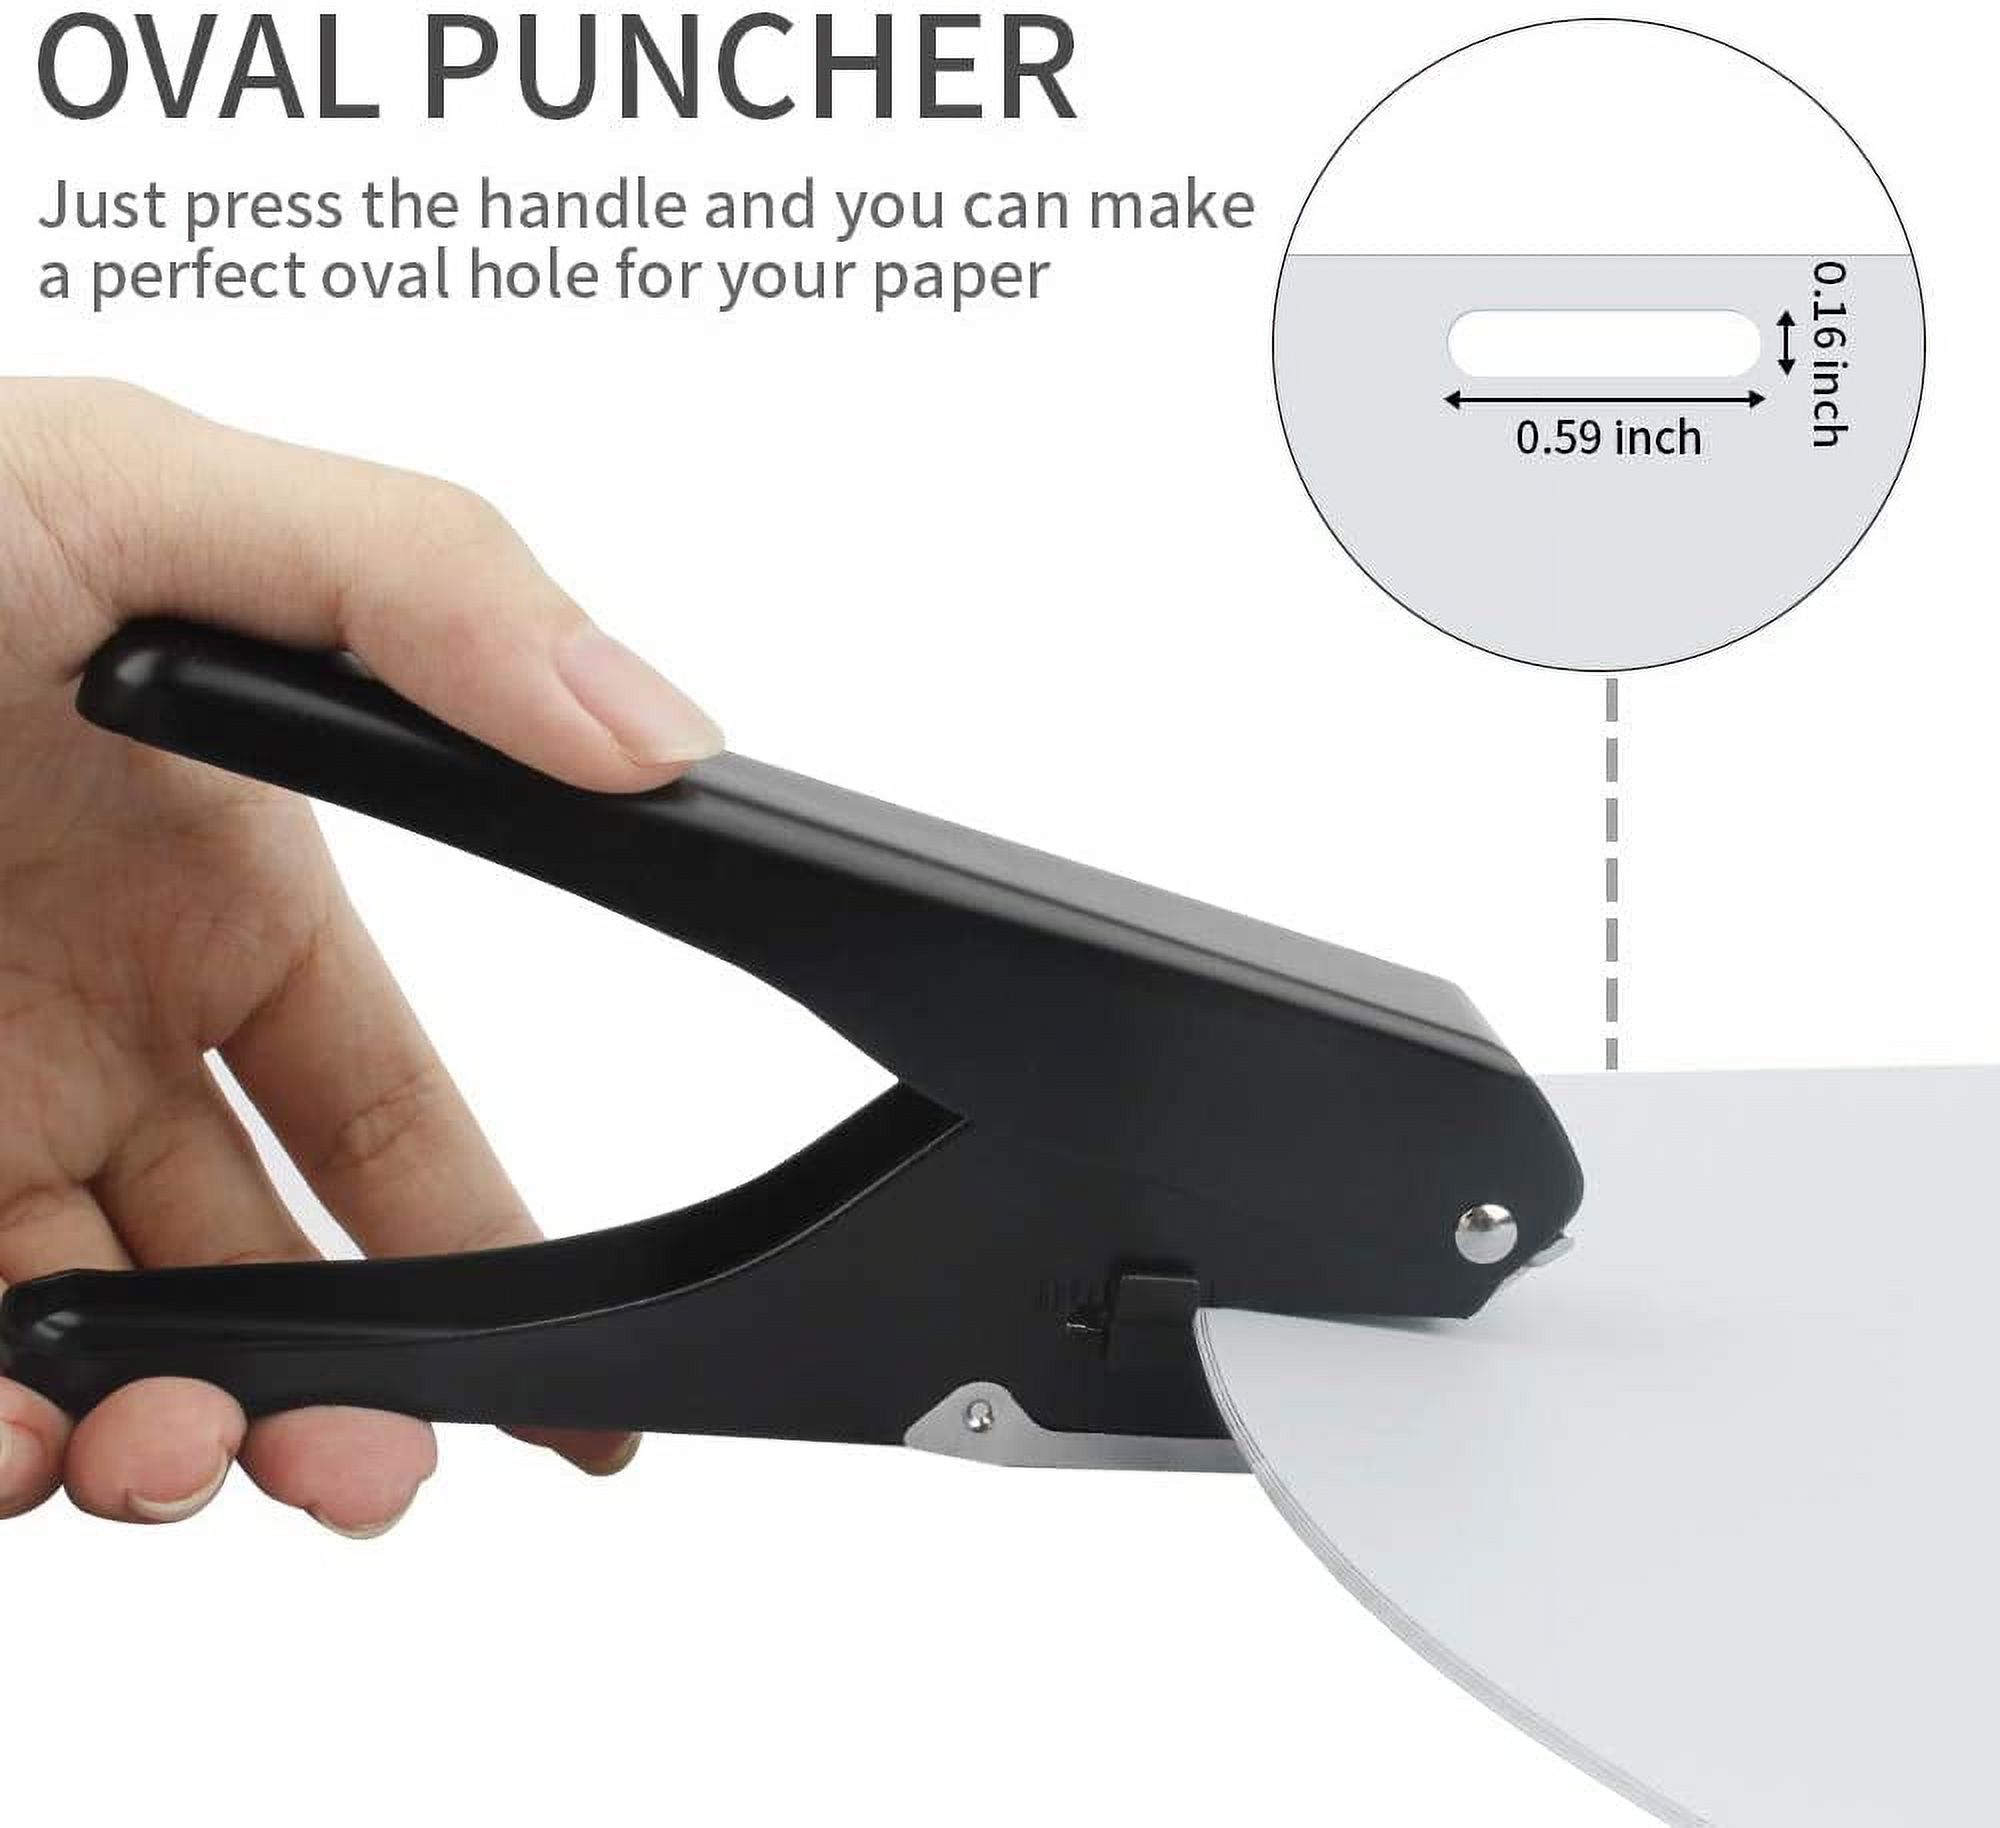 Heavy-Duty Elliptical Punch - Badge Hole Punch for ID Cards, PVC